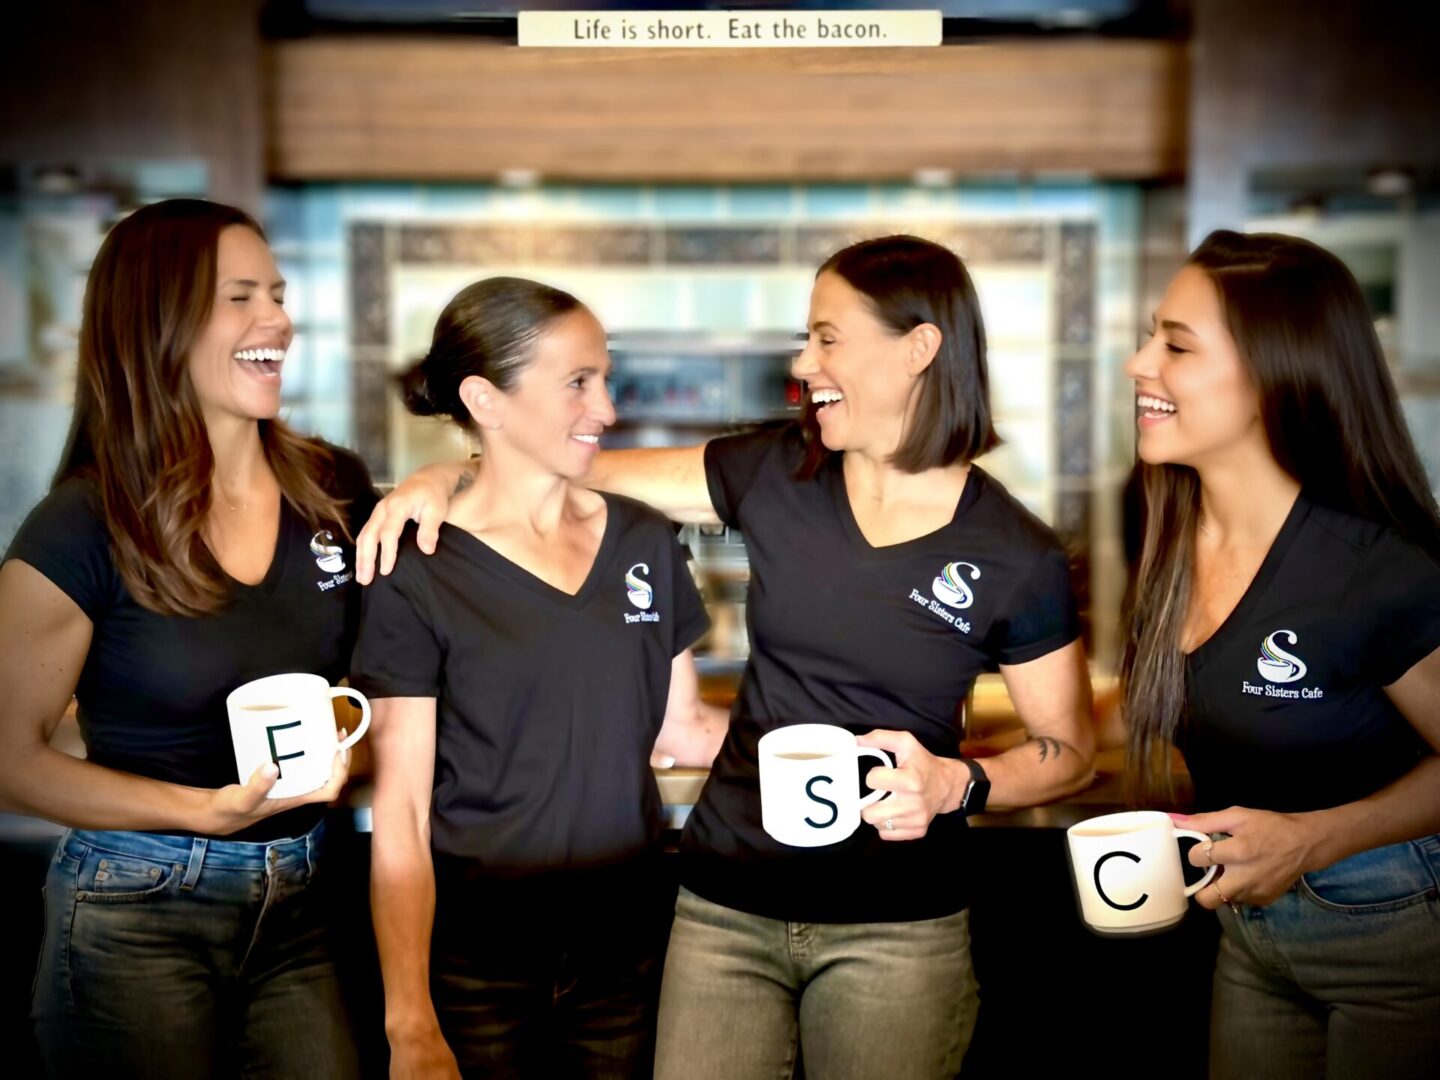 Four women are holding coffee mugs in a group.